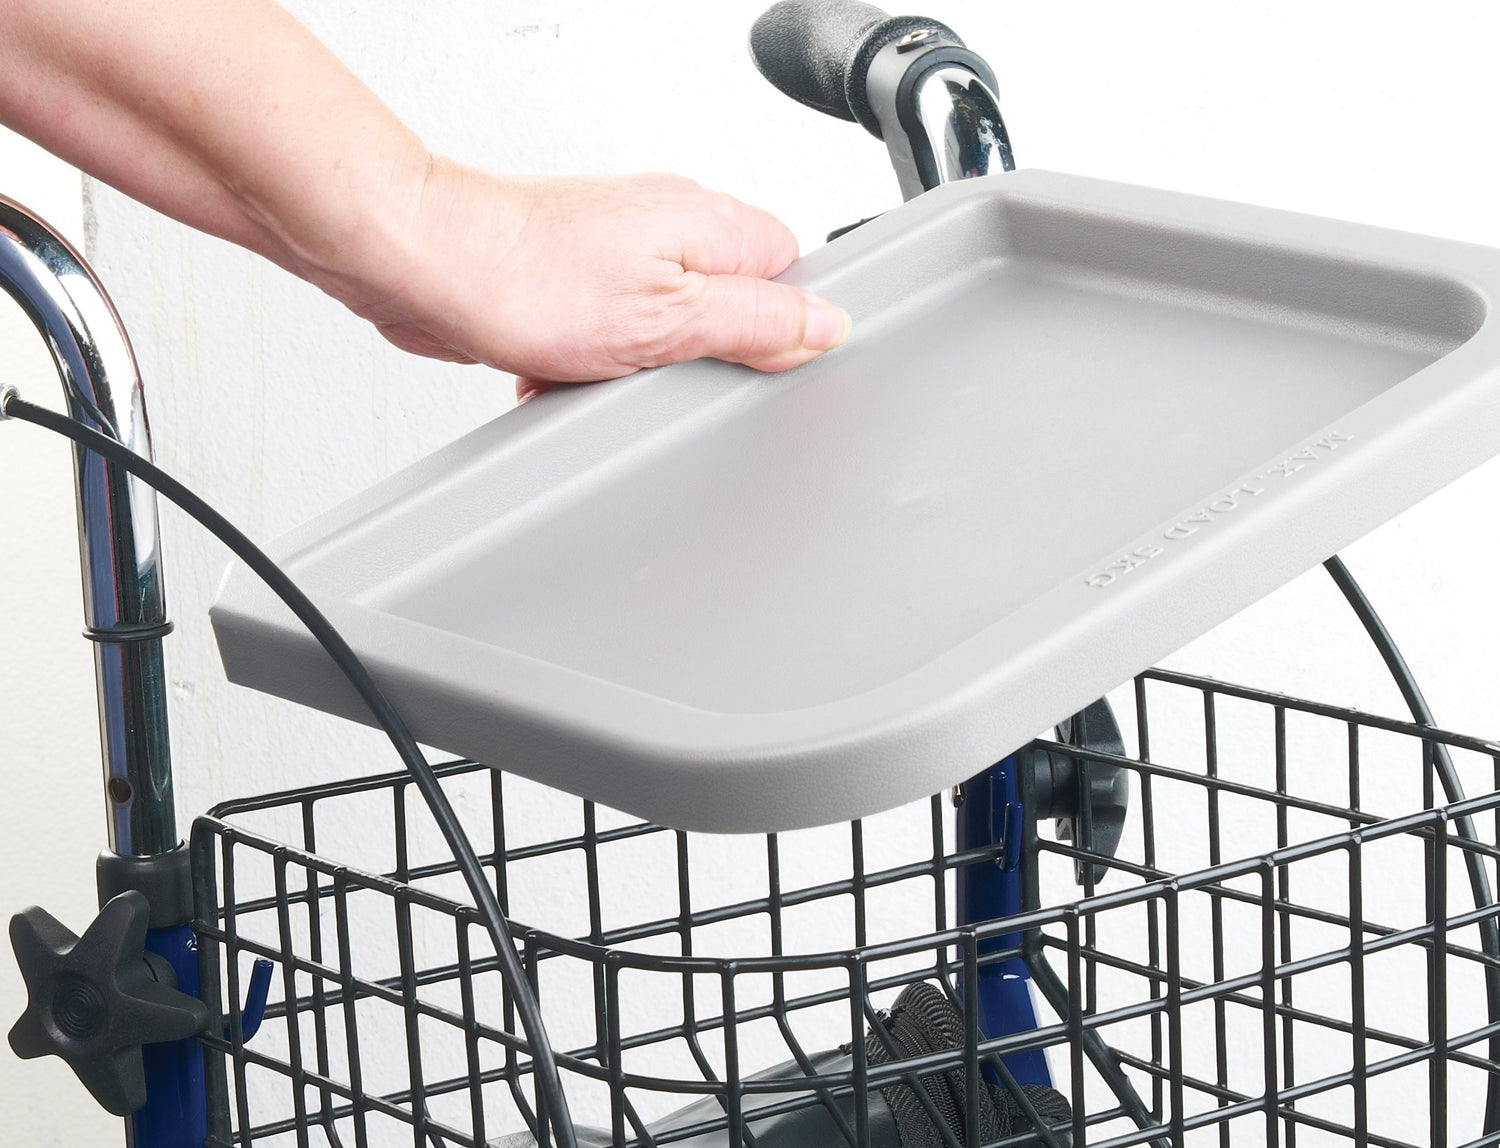 Removable Tray - Basket Lid